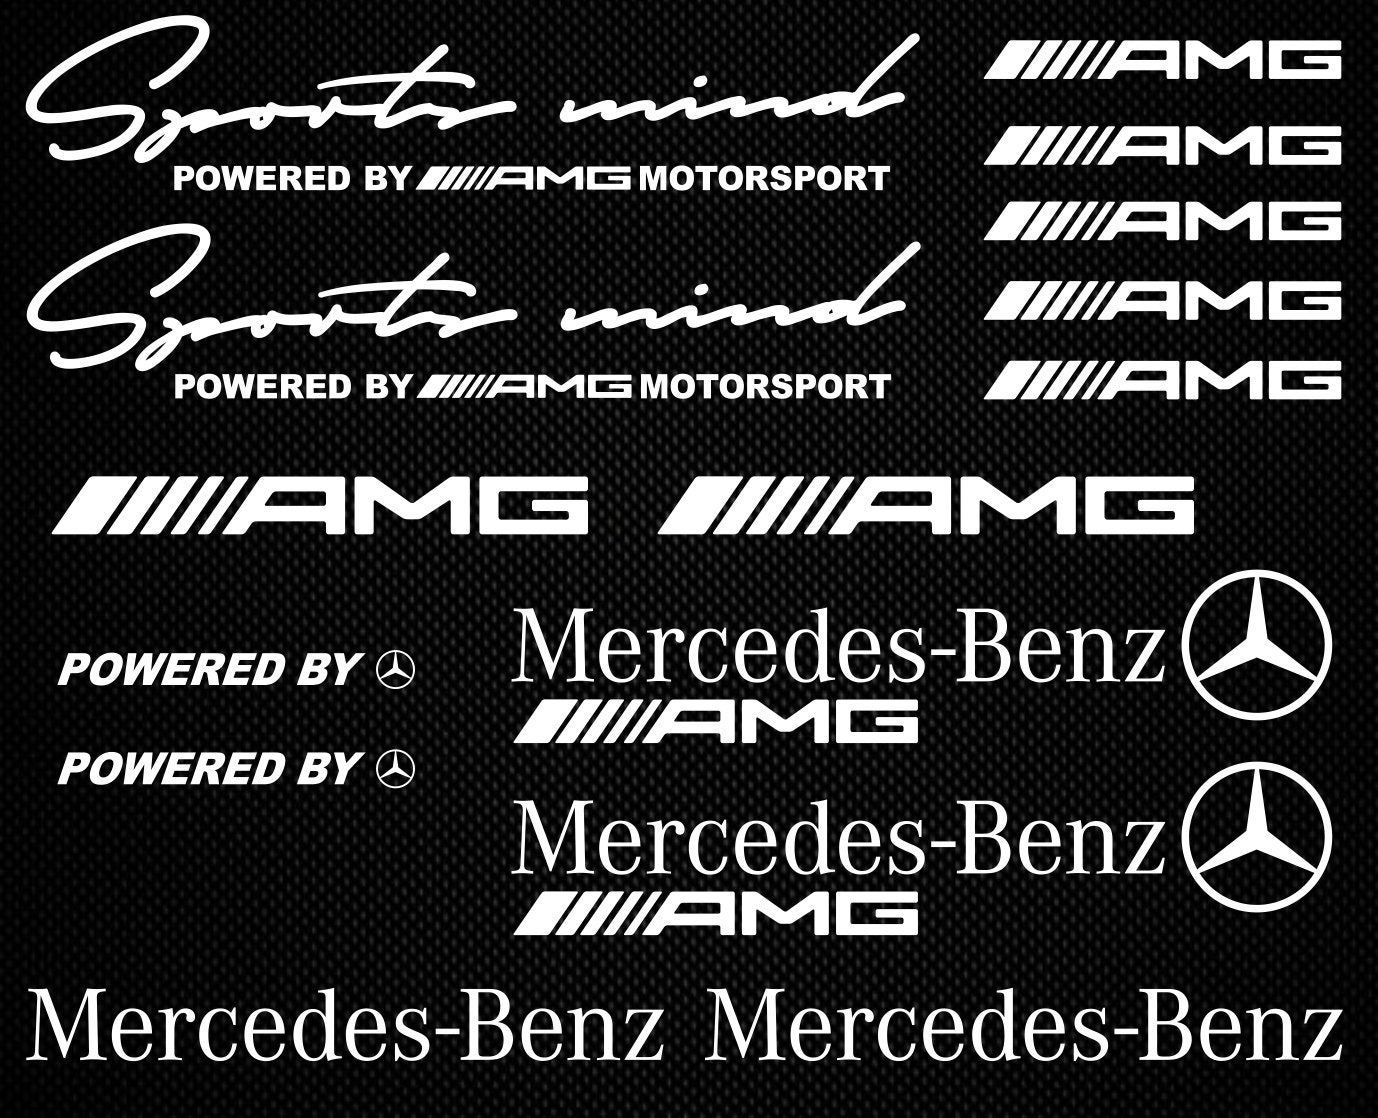 Powered by Mercedes Sticker Amg Decal Sports Mind Benz Accessories for  Racing Tuning Aufkleber Adhesives Vinyl Cut 